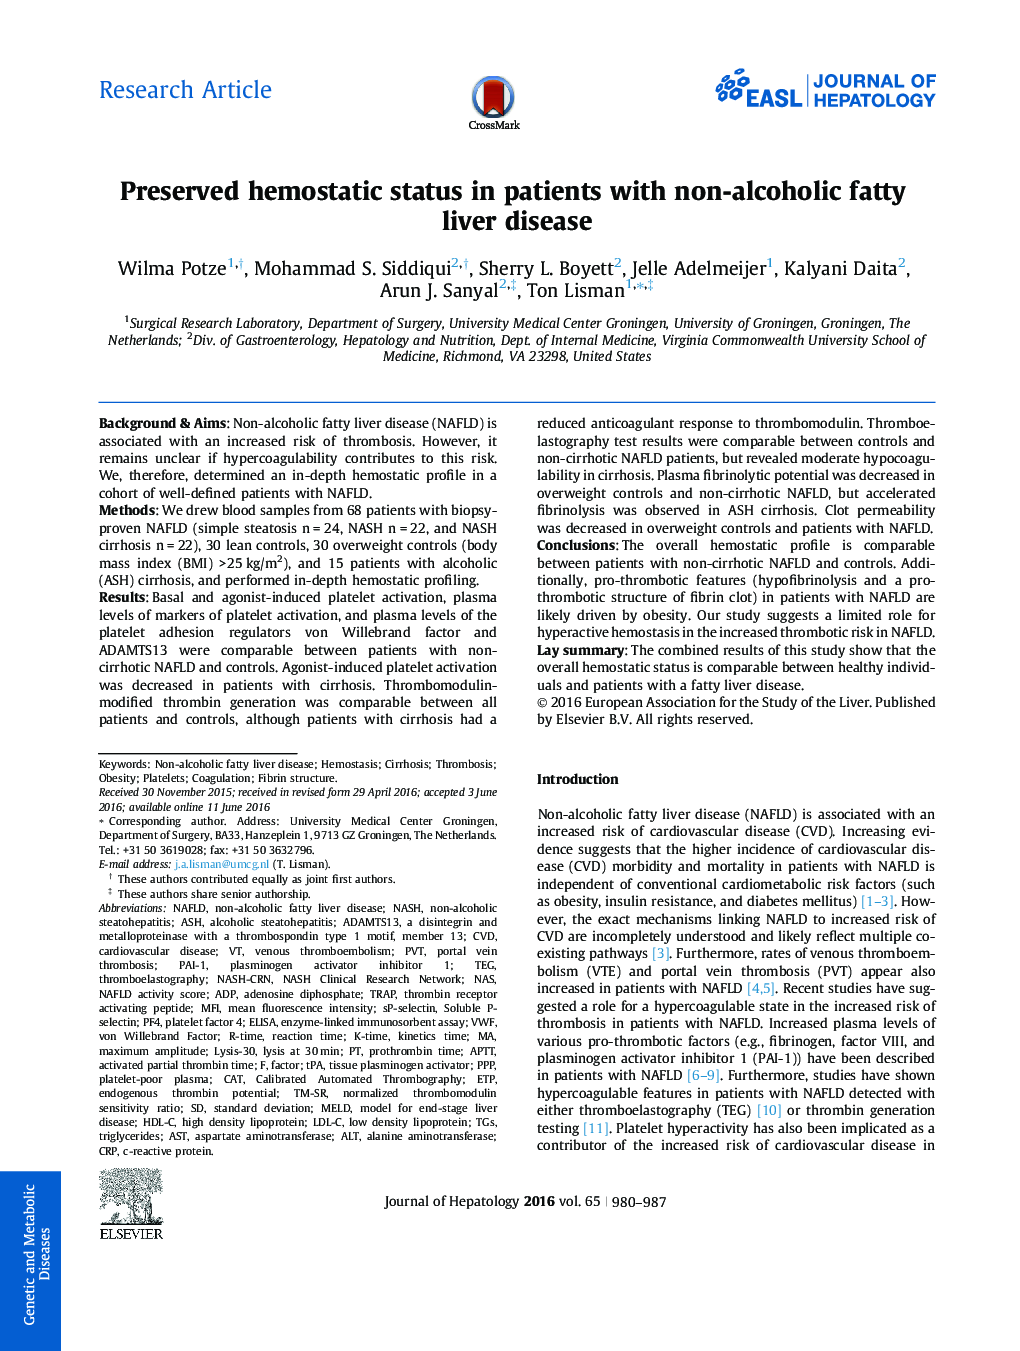 Preserved hemostatic status in patients with non-alcoholic fatty liver disease